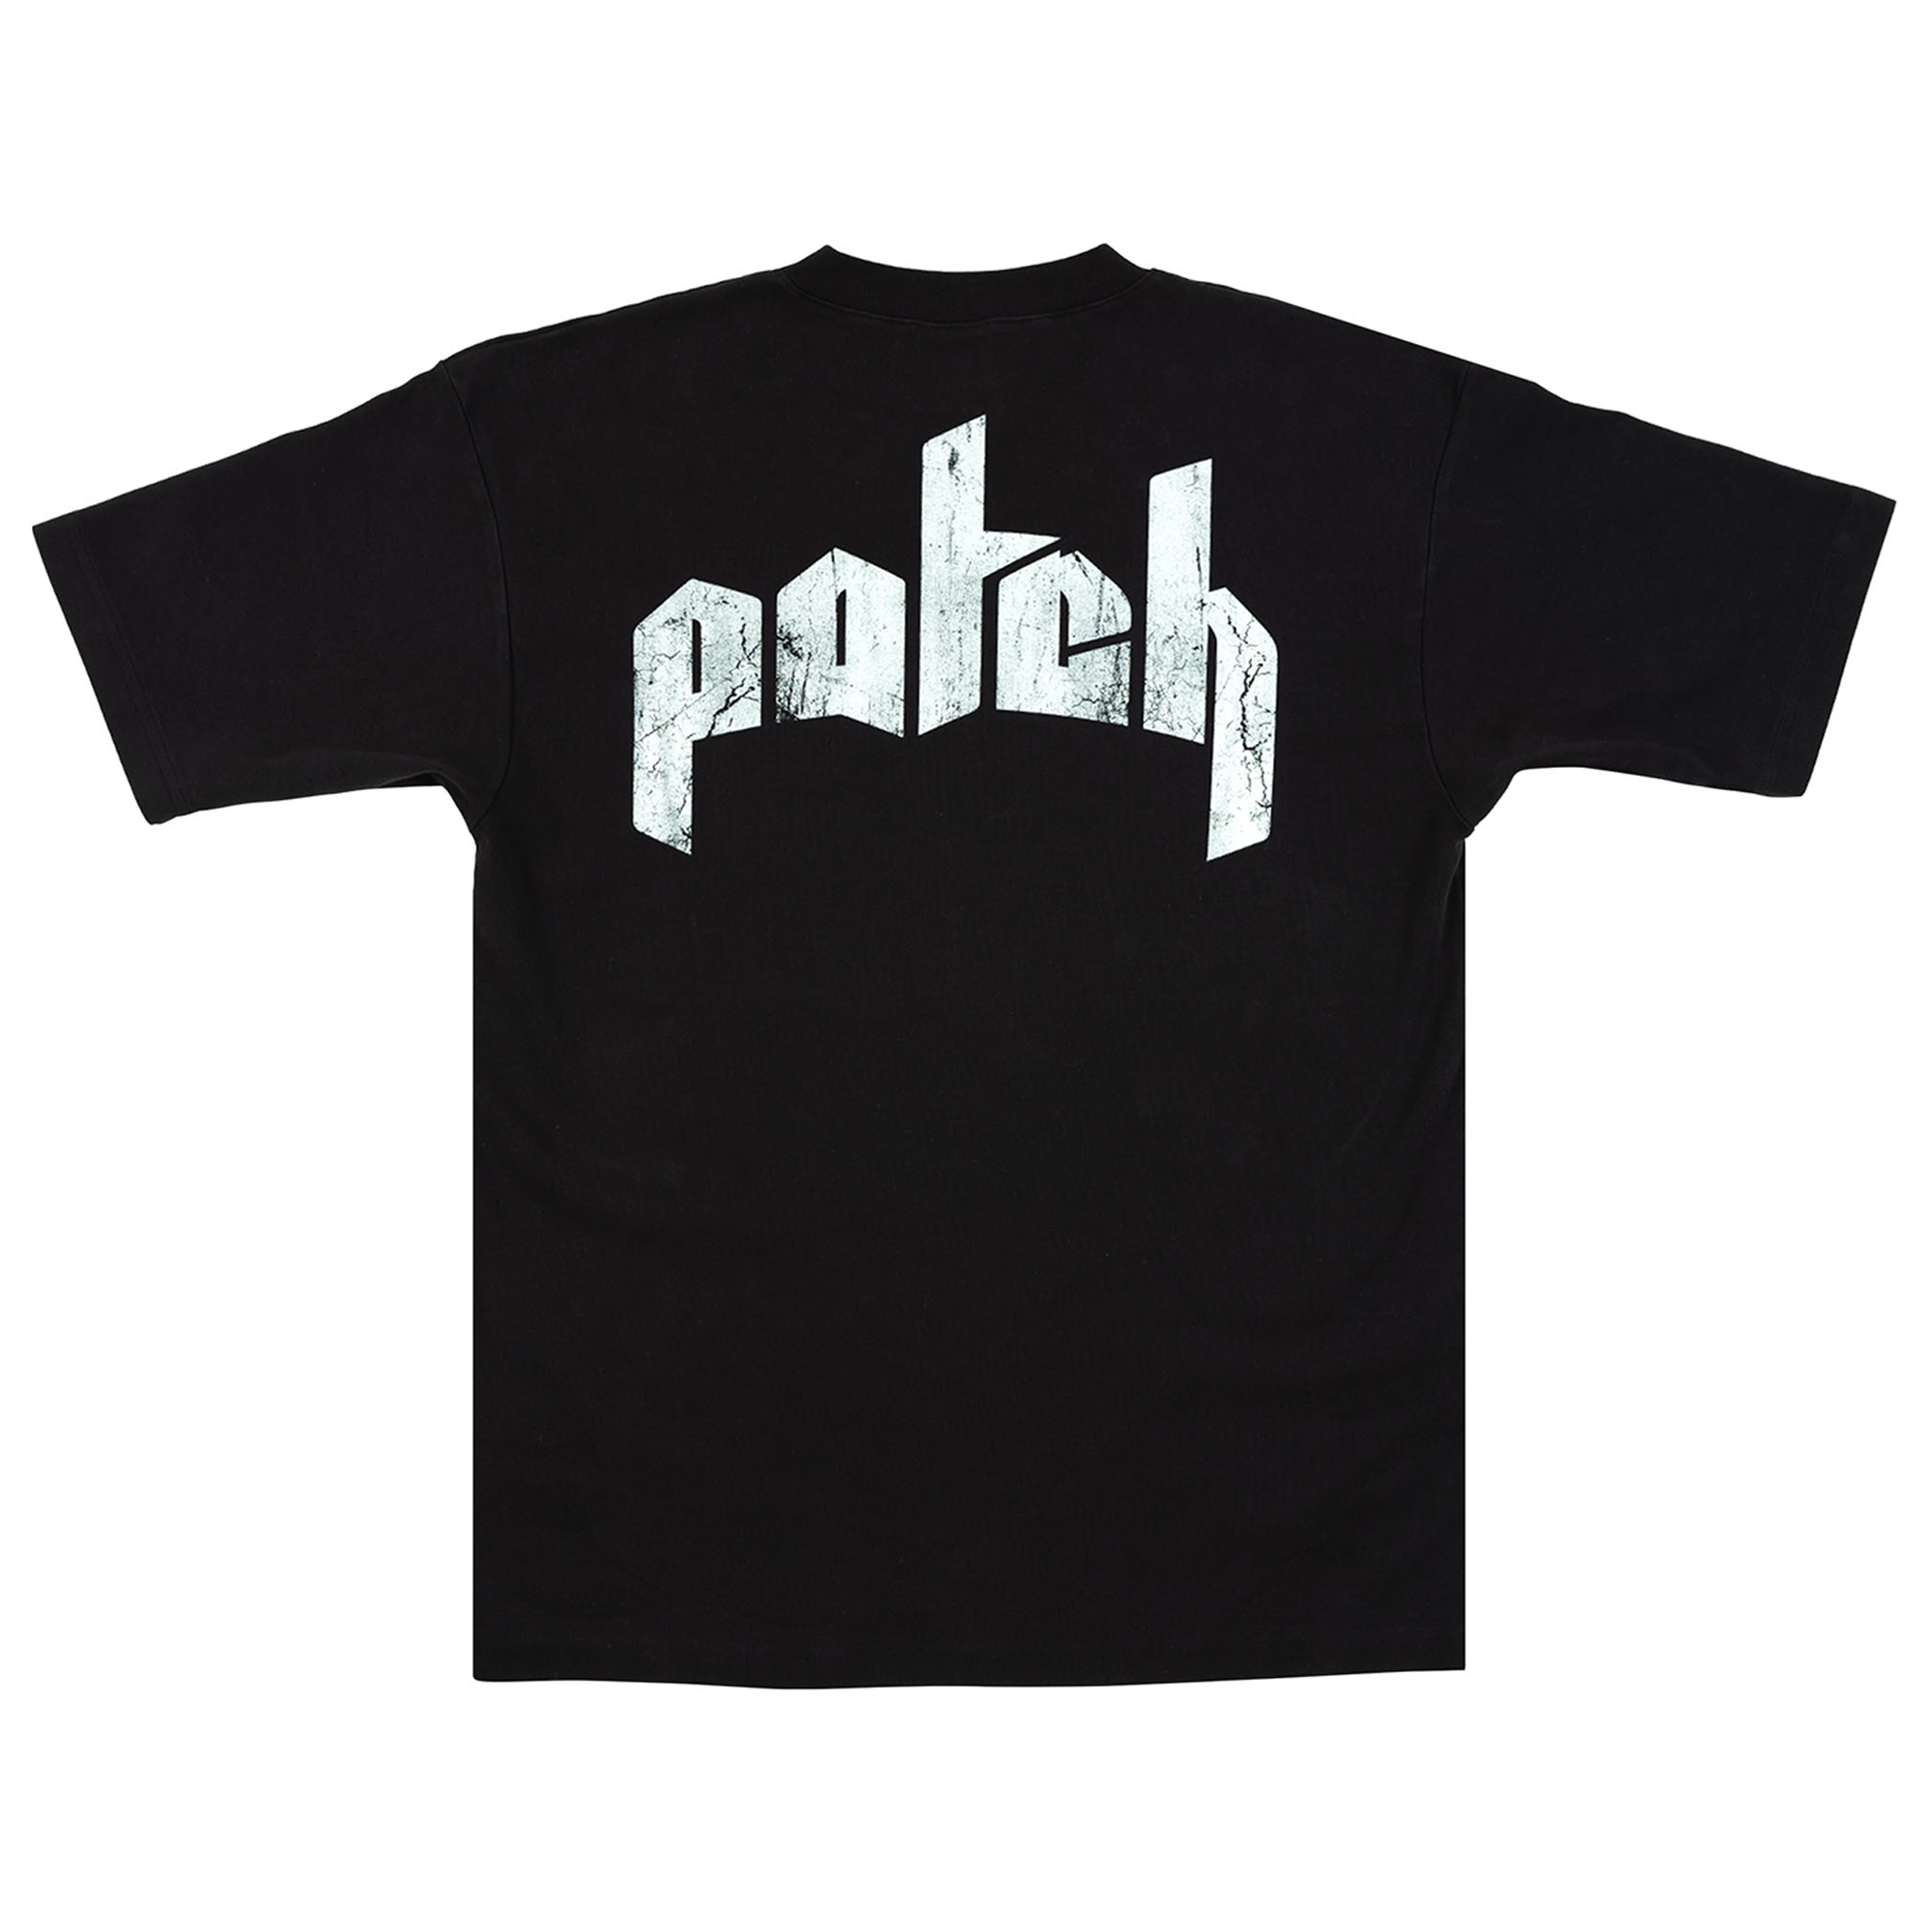 Rear View of the Black Patch Distortion T-shirt